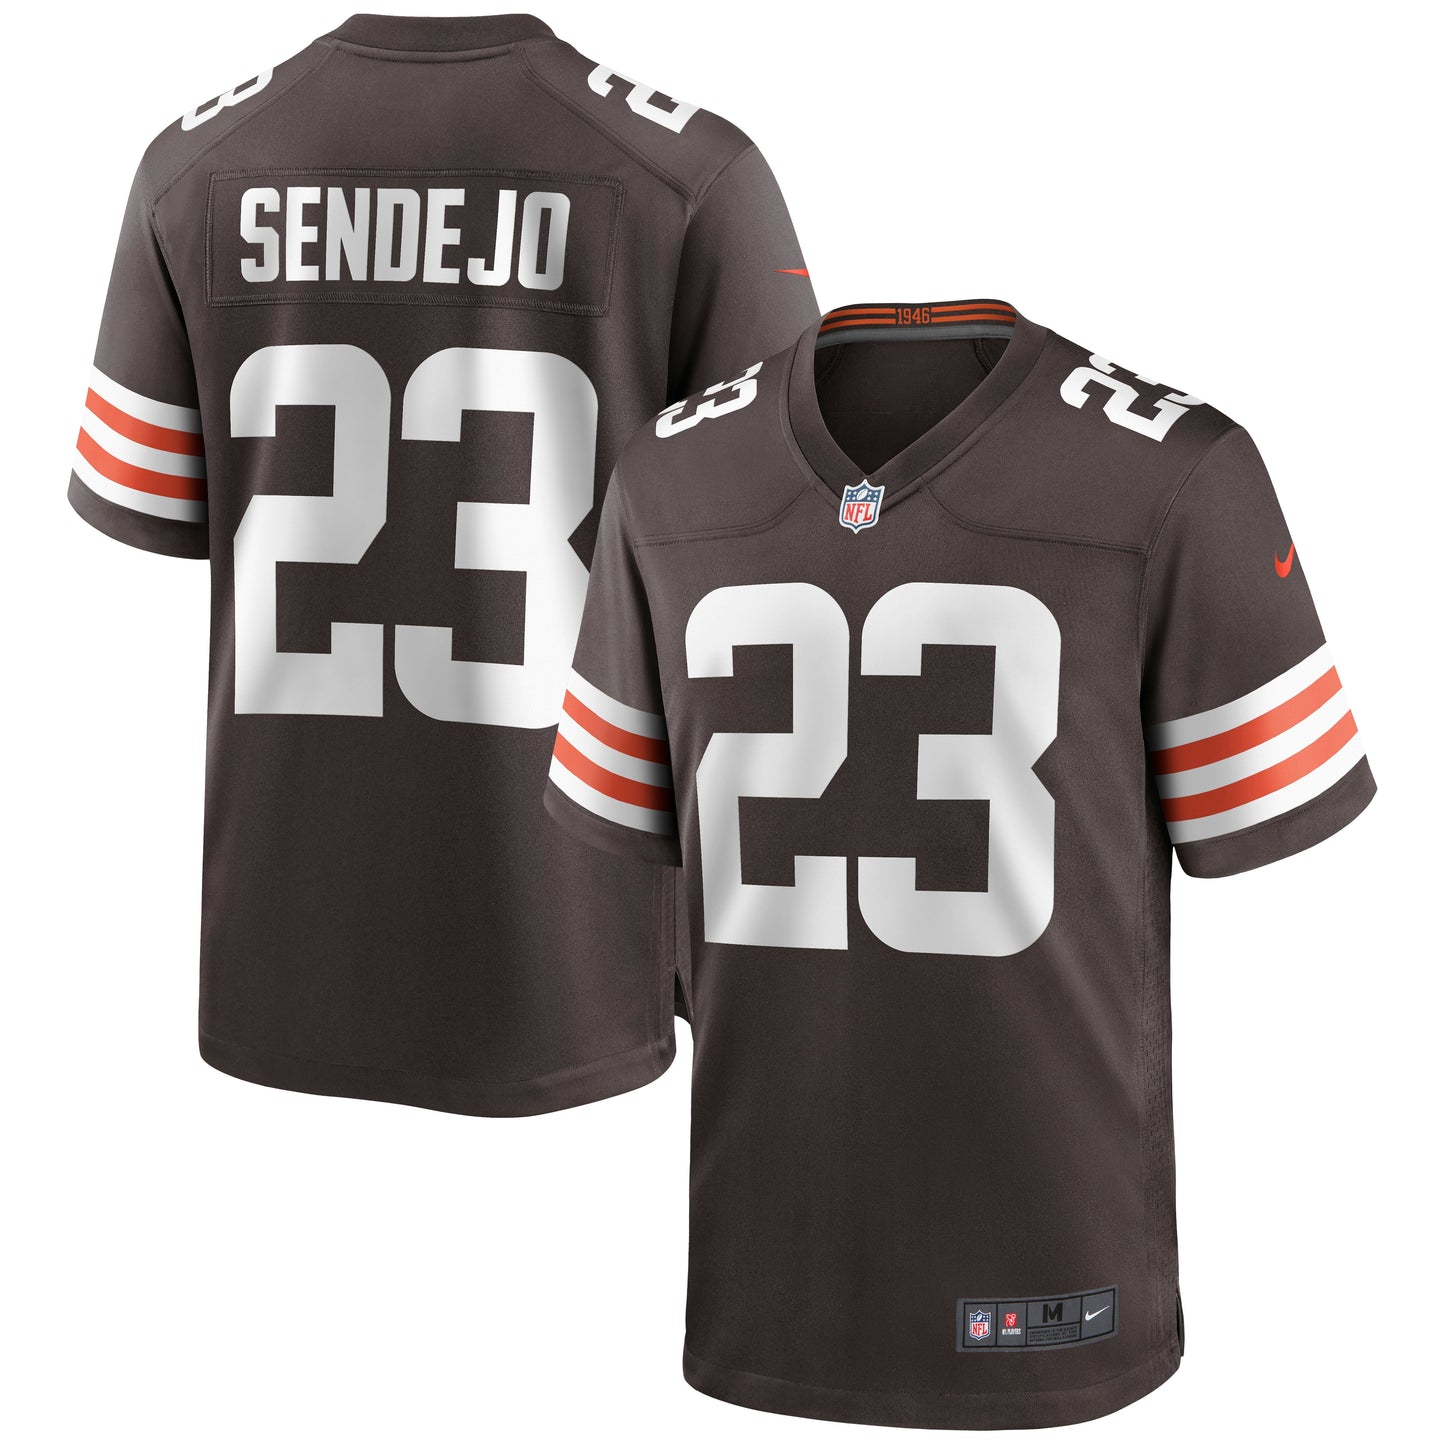 Andrew Sendejo Cleveland Browns Nike Game Jersey - Brown